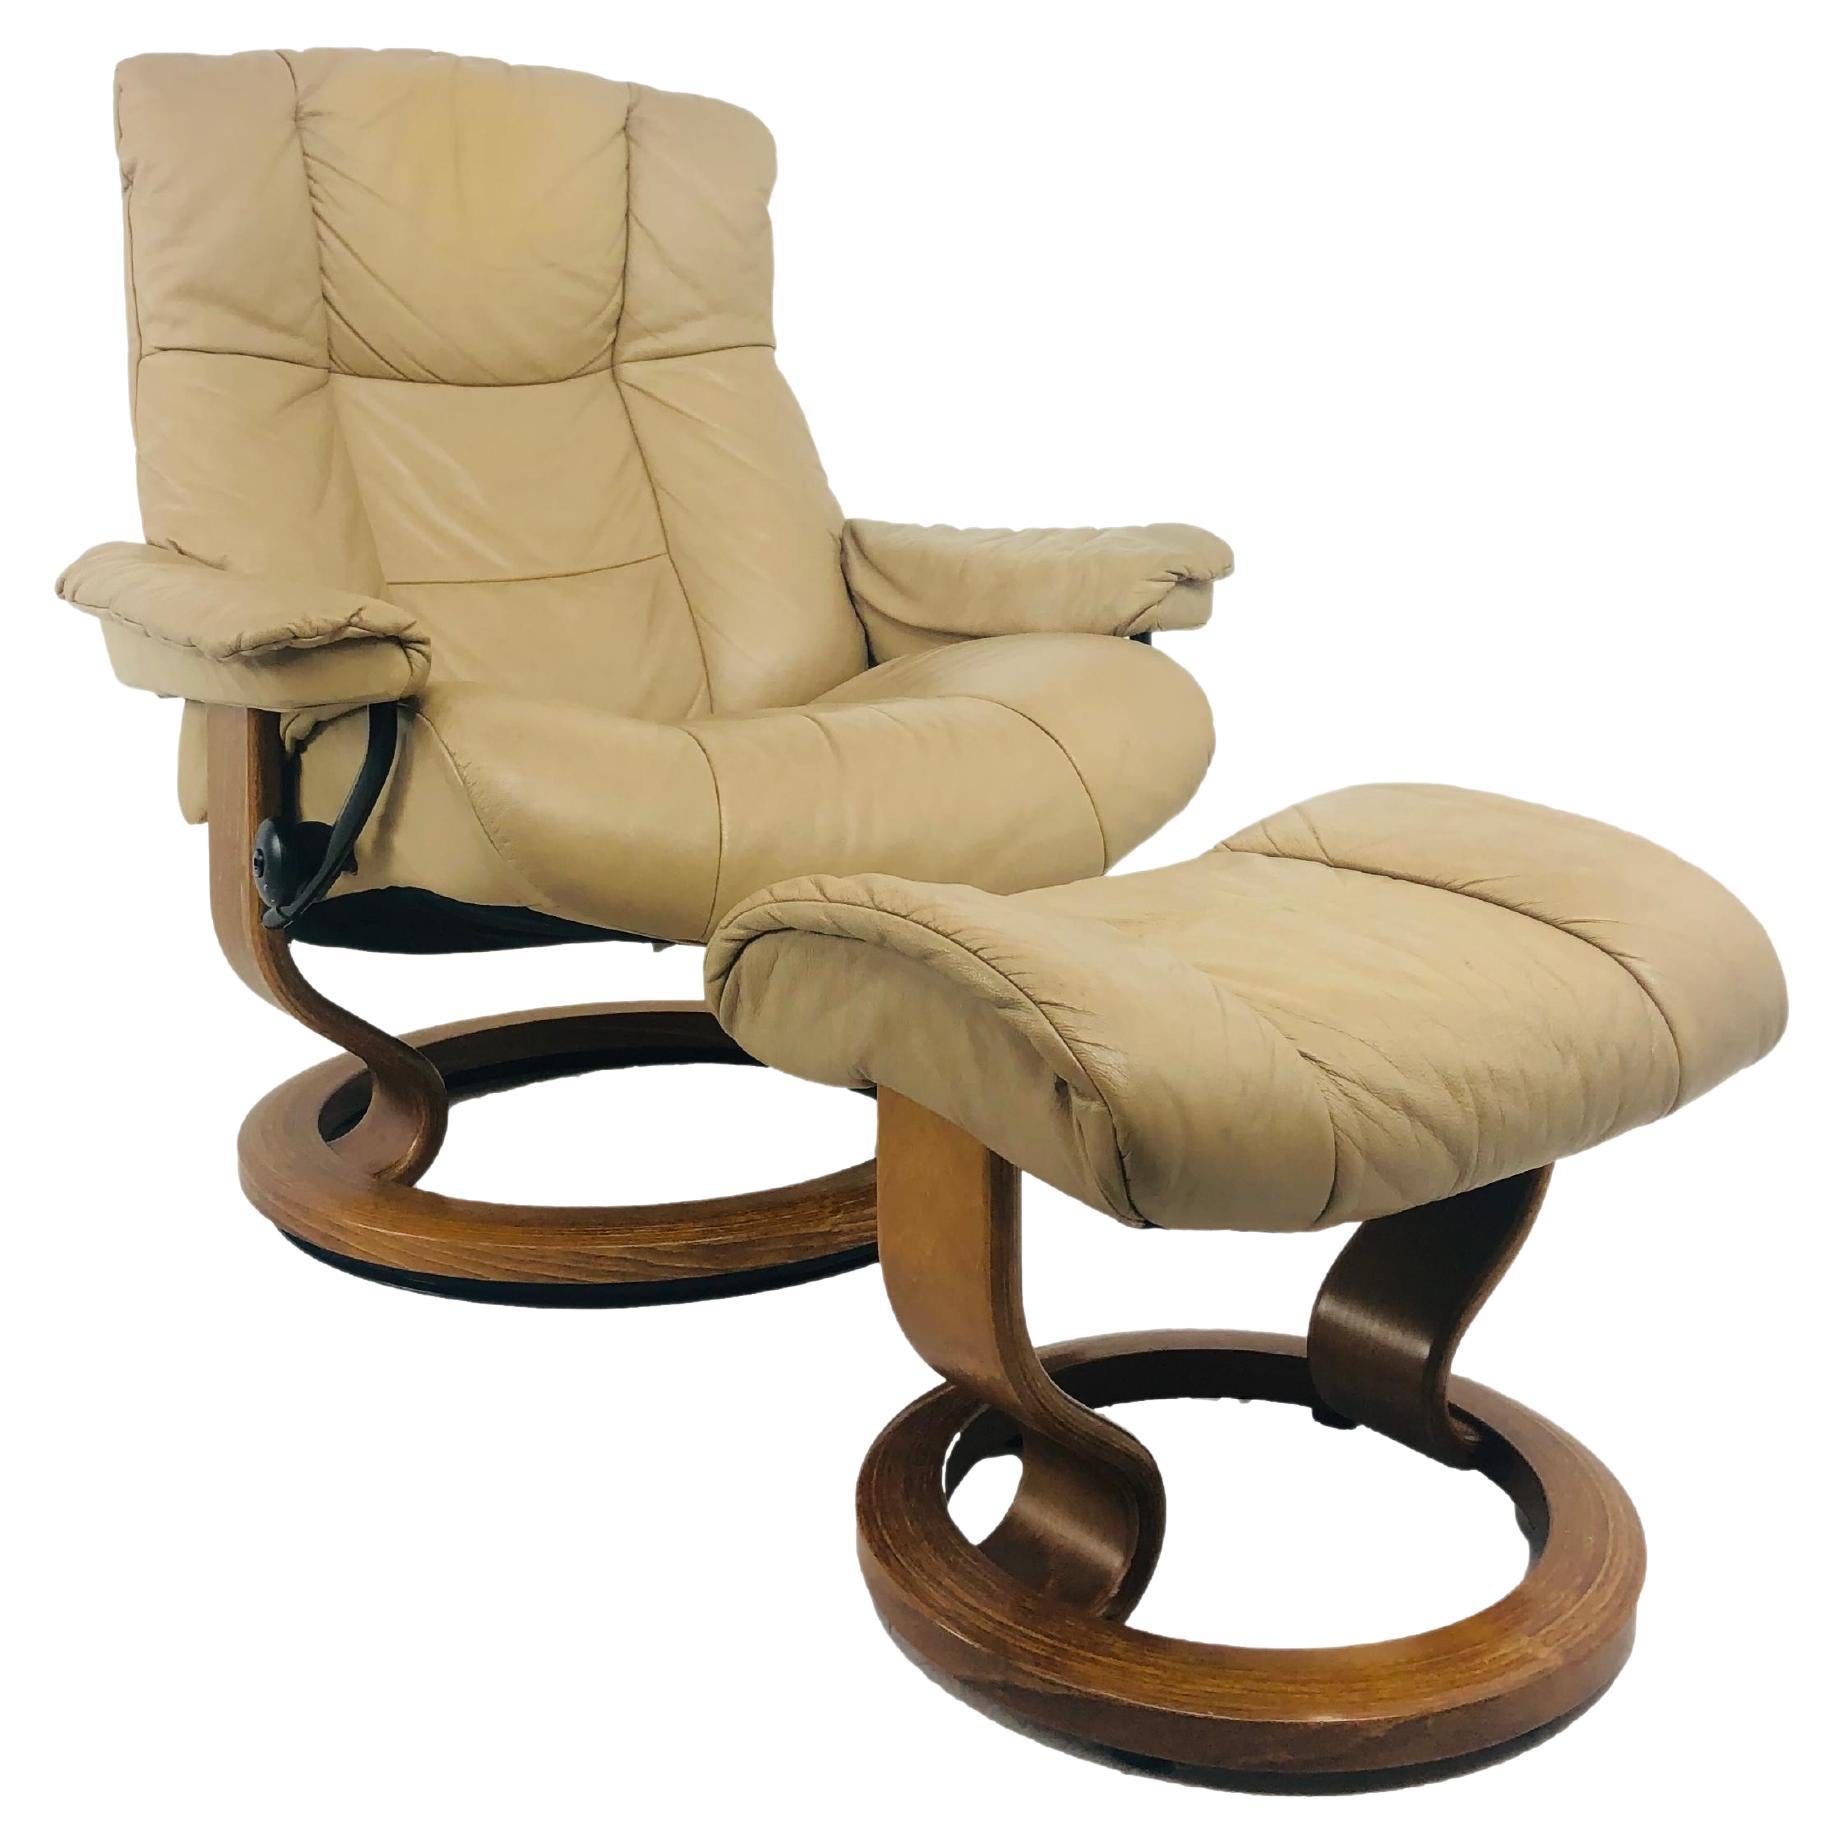 Ekrones "Mayfair" Stressless Lounge Chair with Ottoman